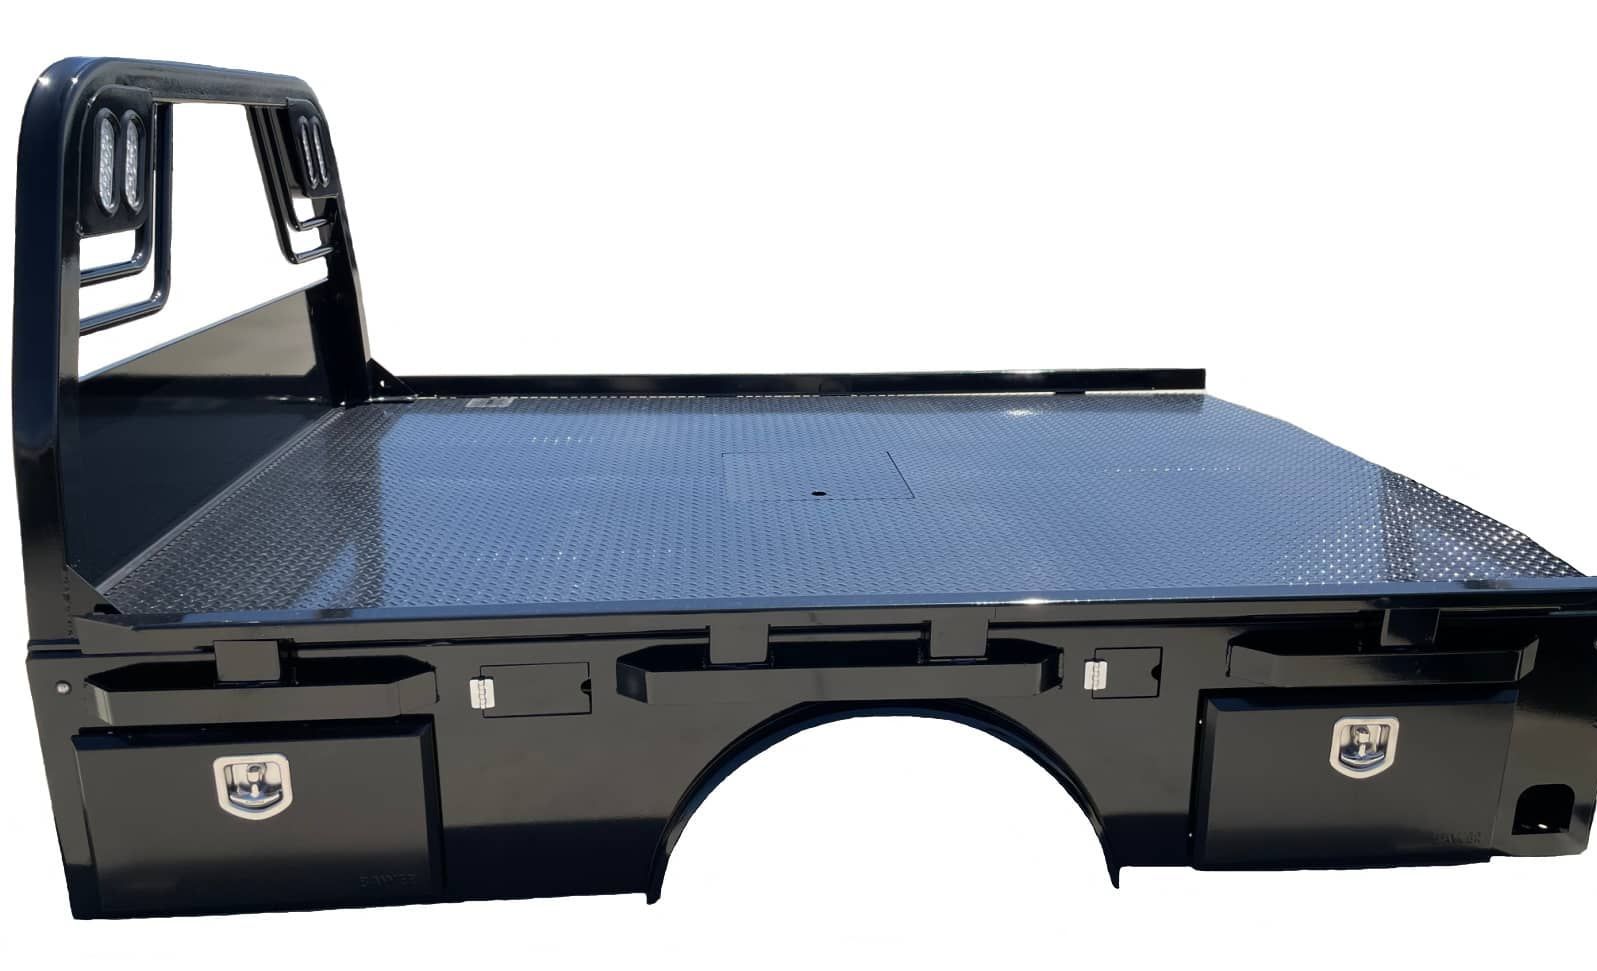 A black truck bed with a tray on top of it on a white background.